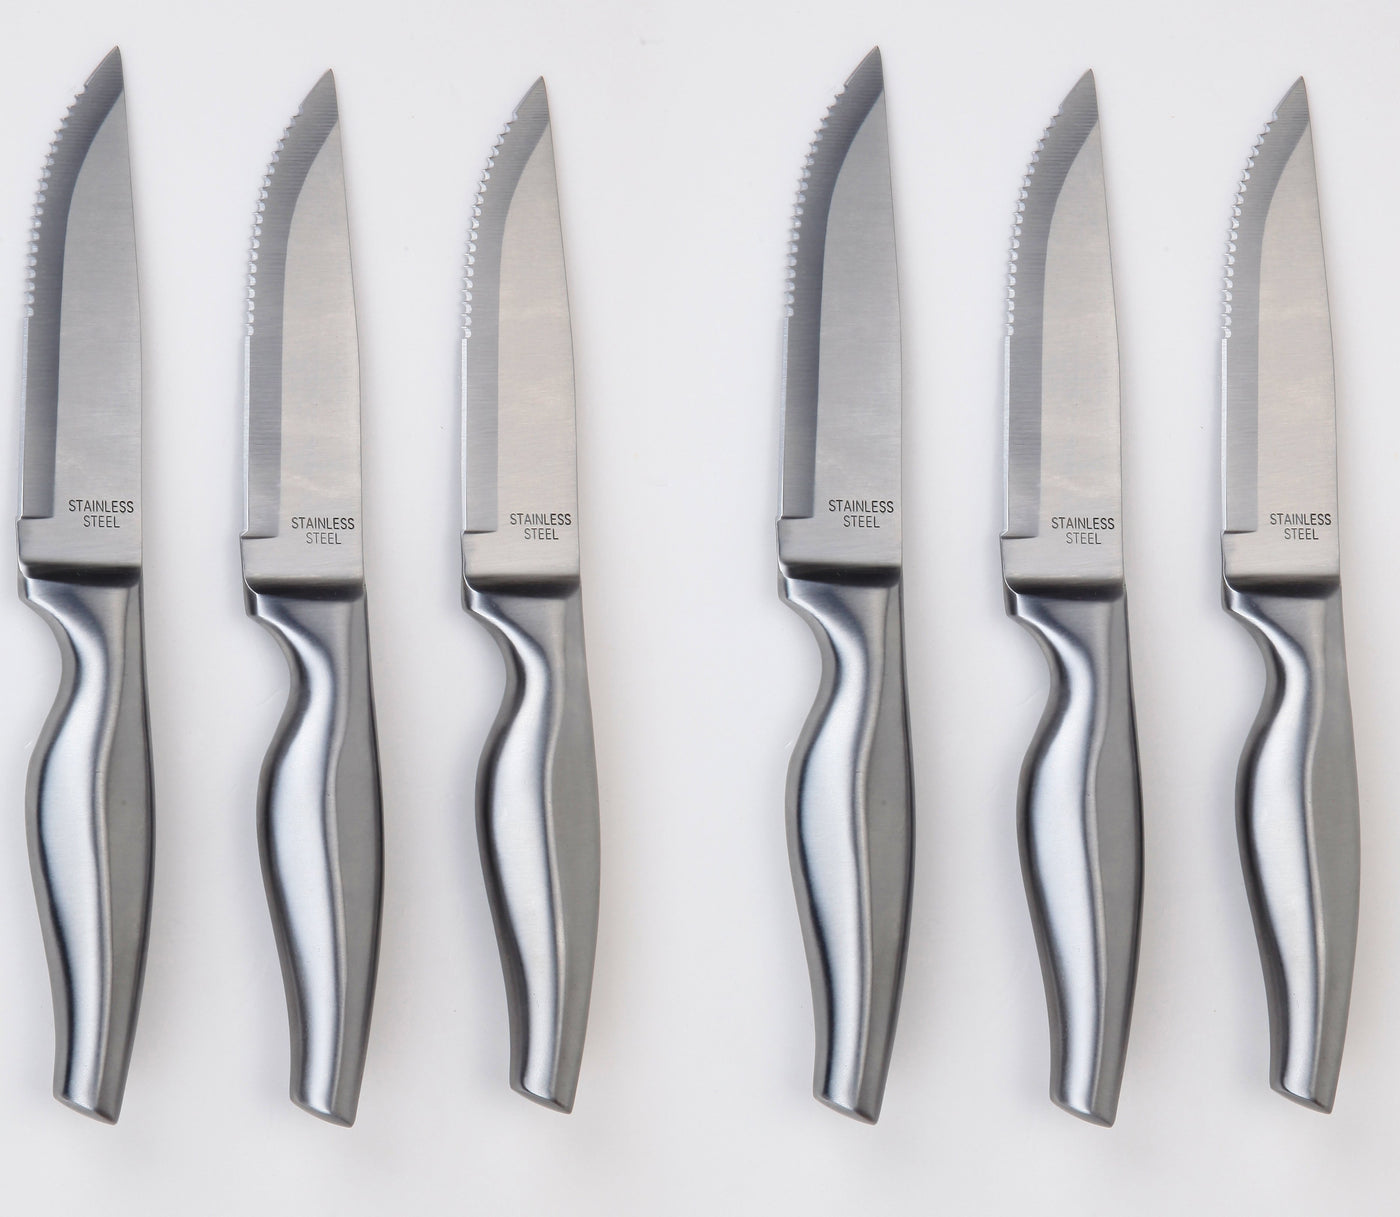 The best steak knives for home use